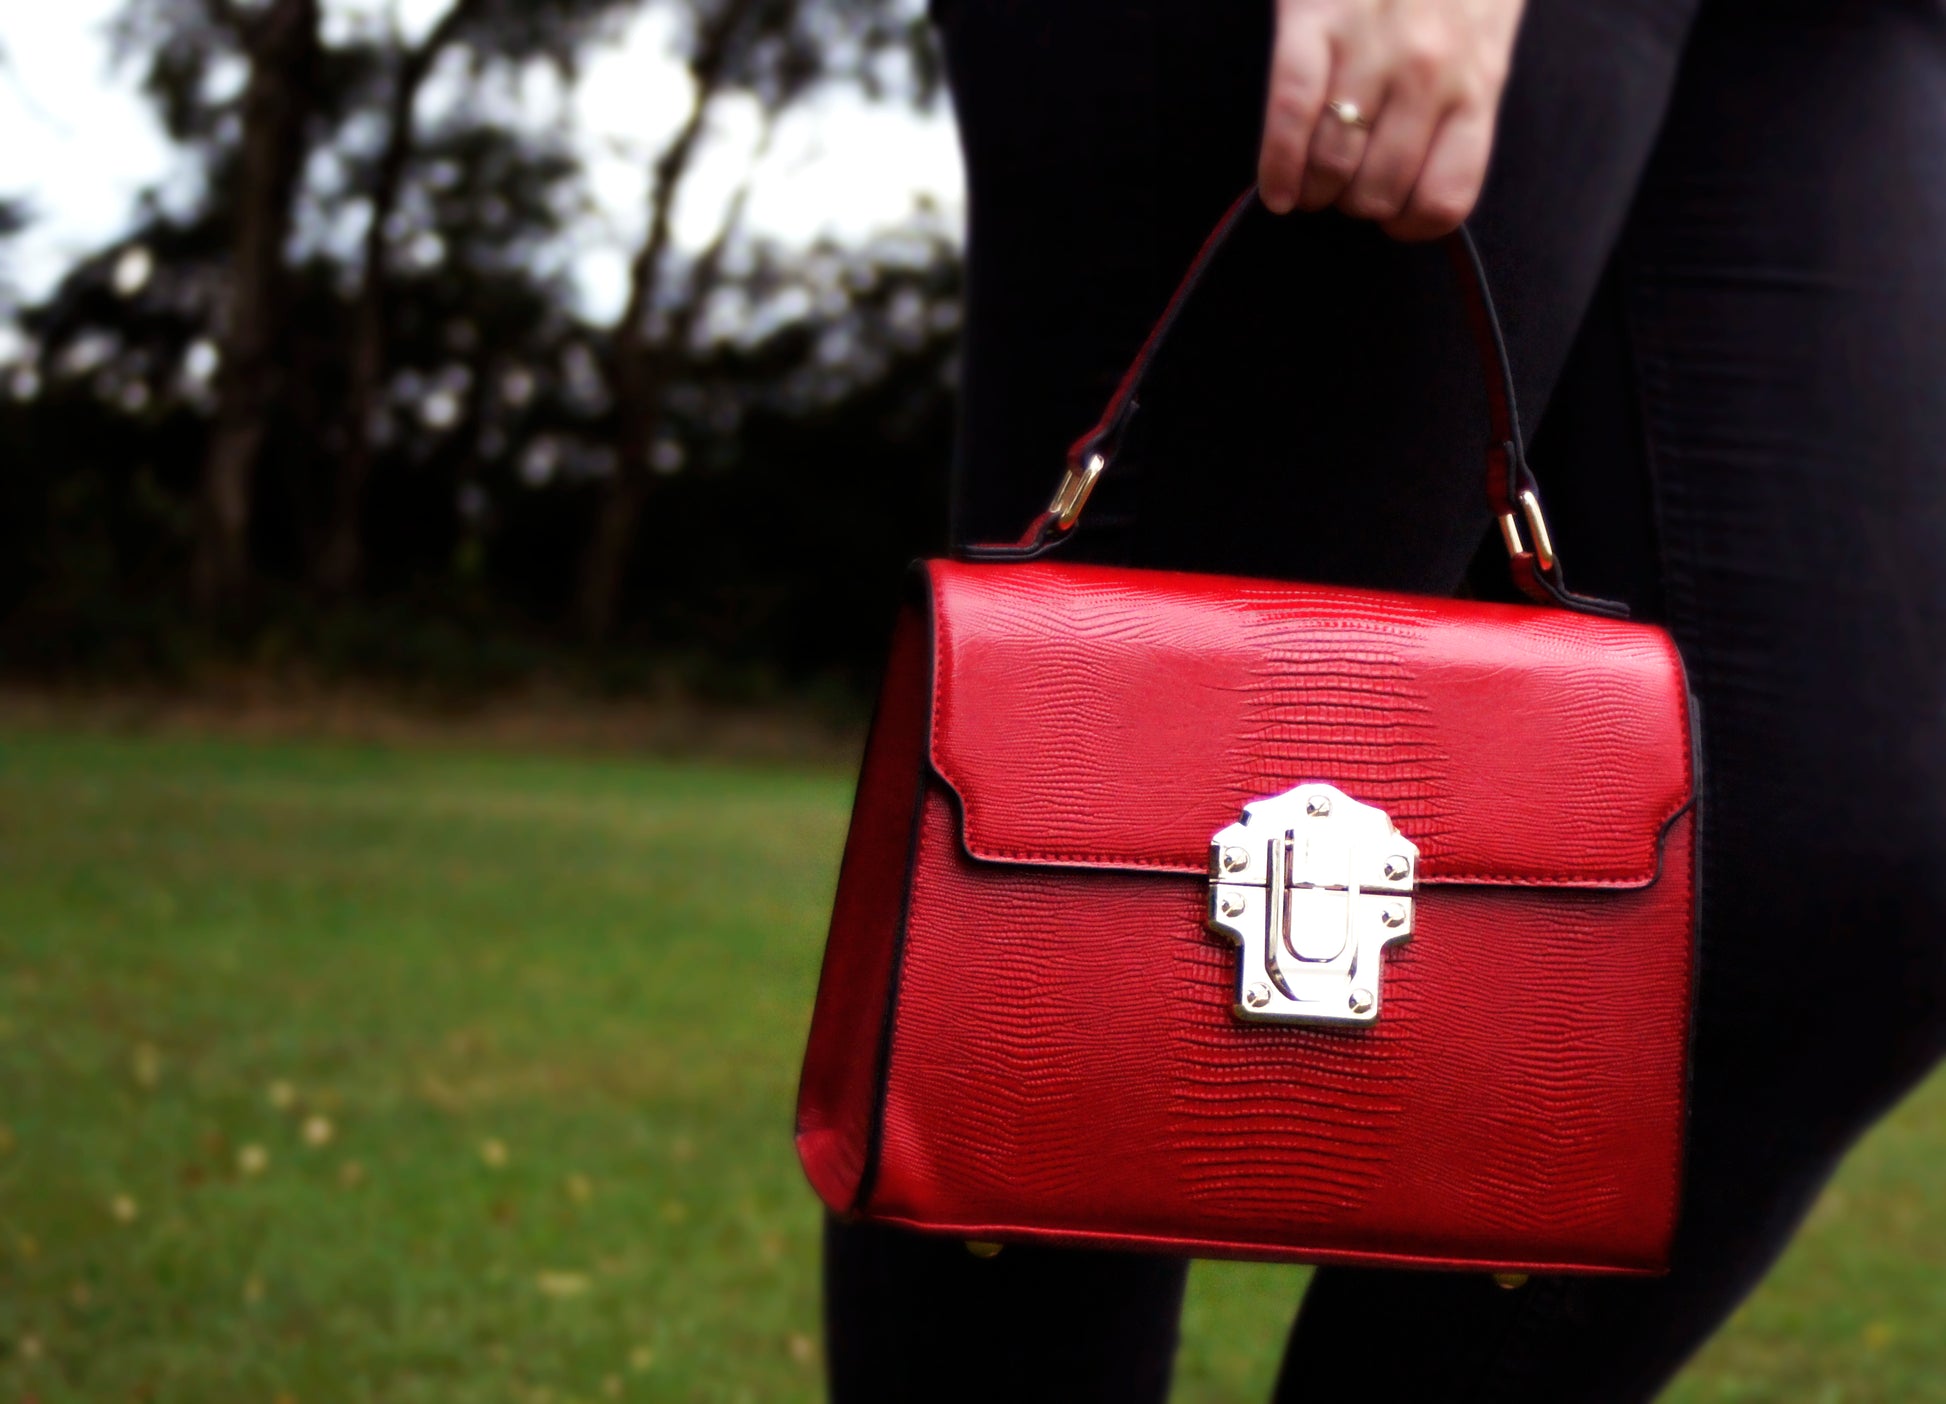 Swanky Swans Charlotte Handbag RedPerfect for School, Weddings, Day out!